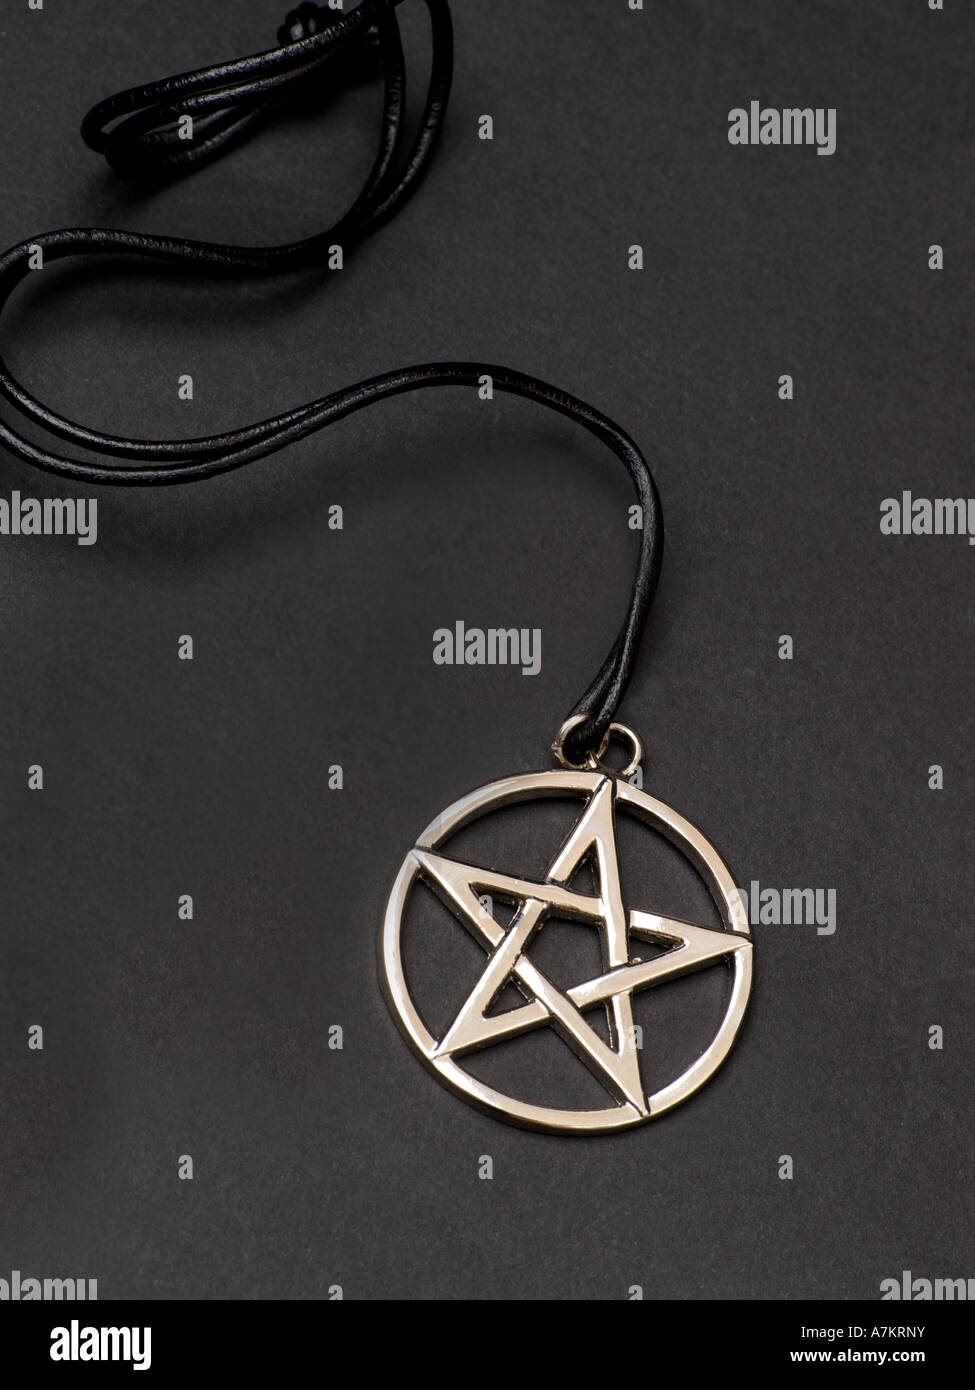 Pentacle Necklace Stock Photo